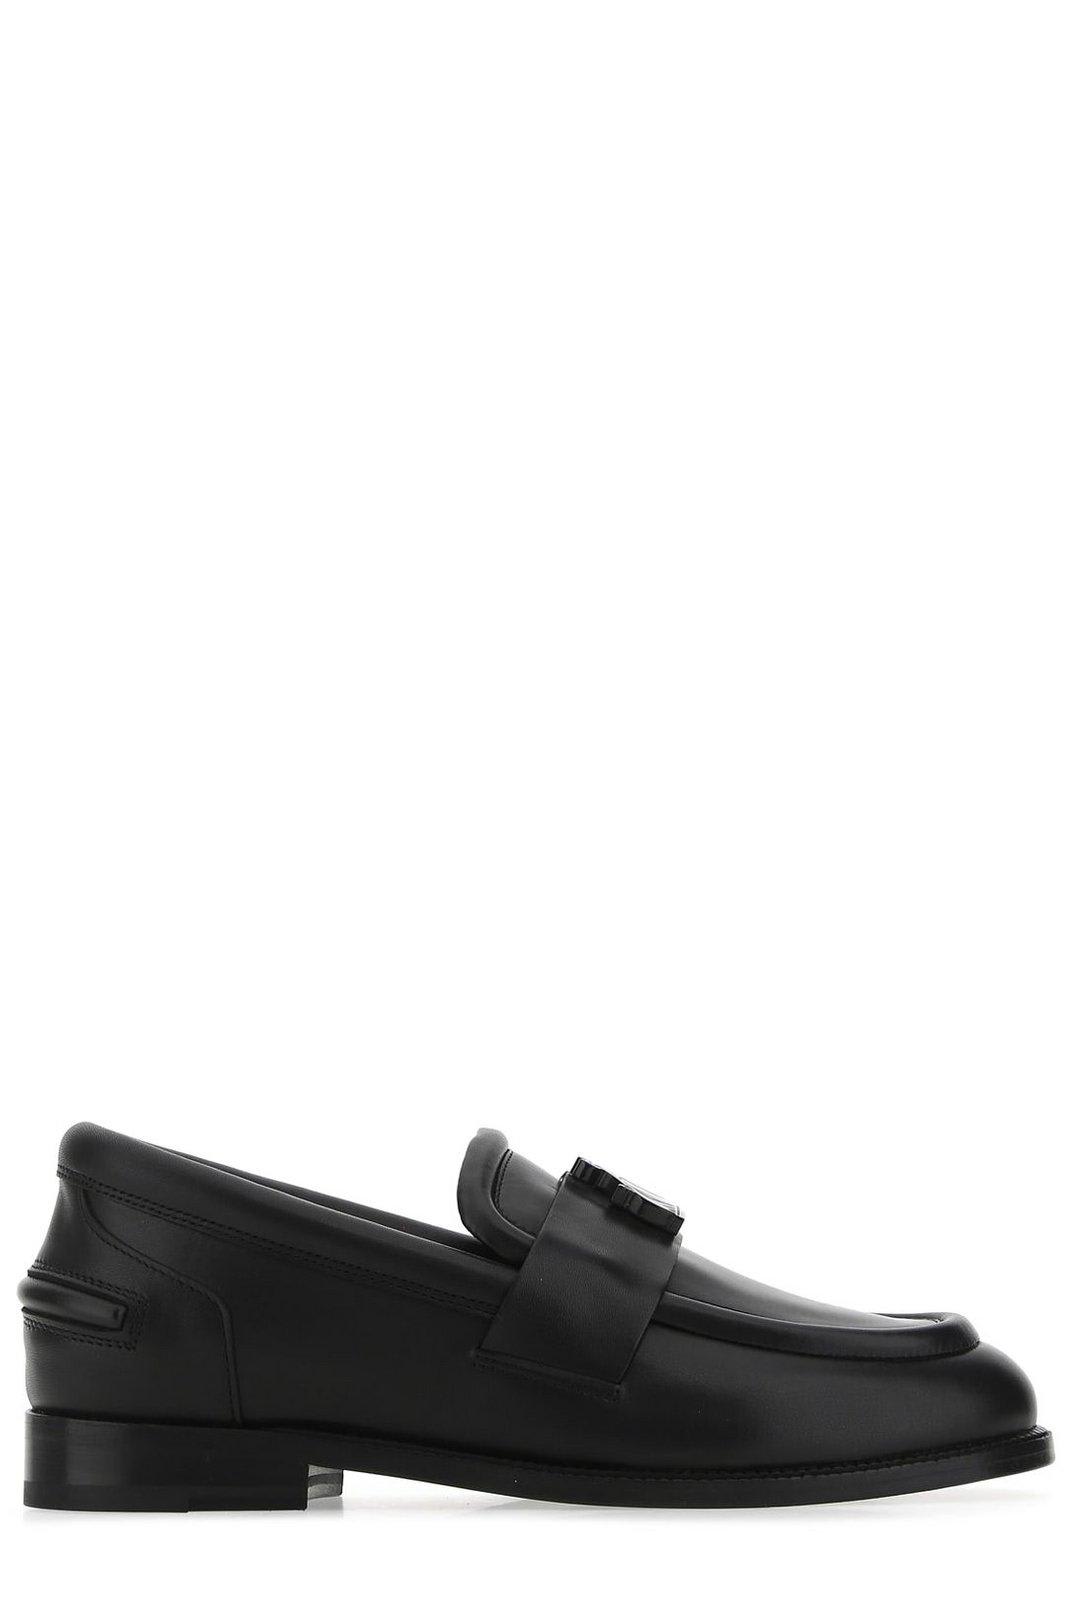 Lanvin Logo Tag Round Toe Loafers